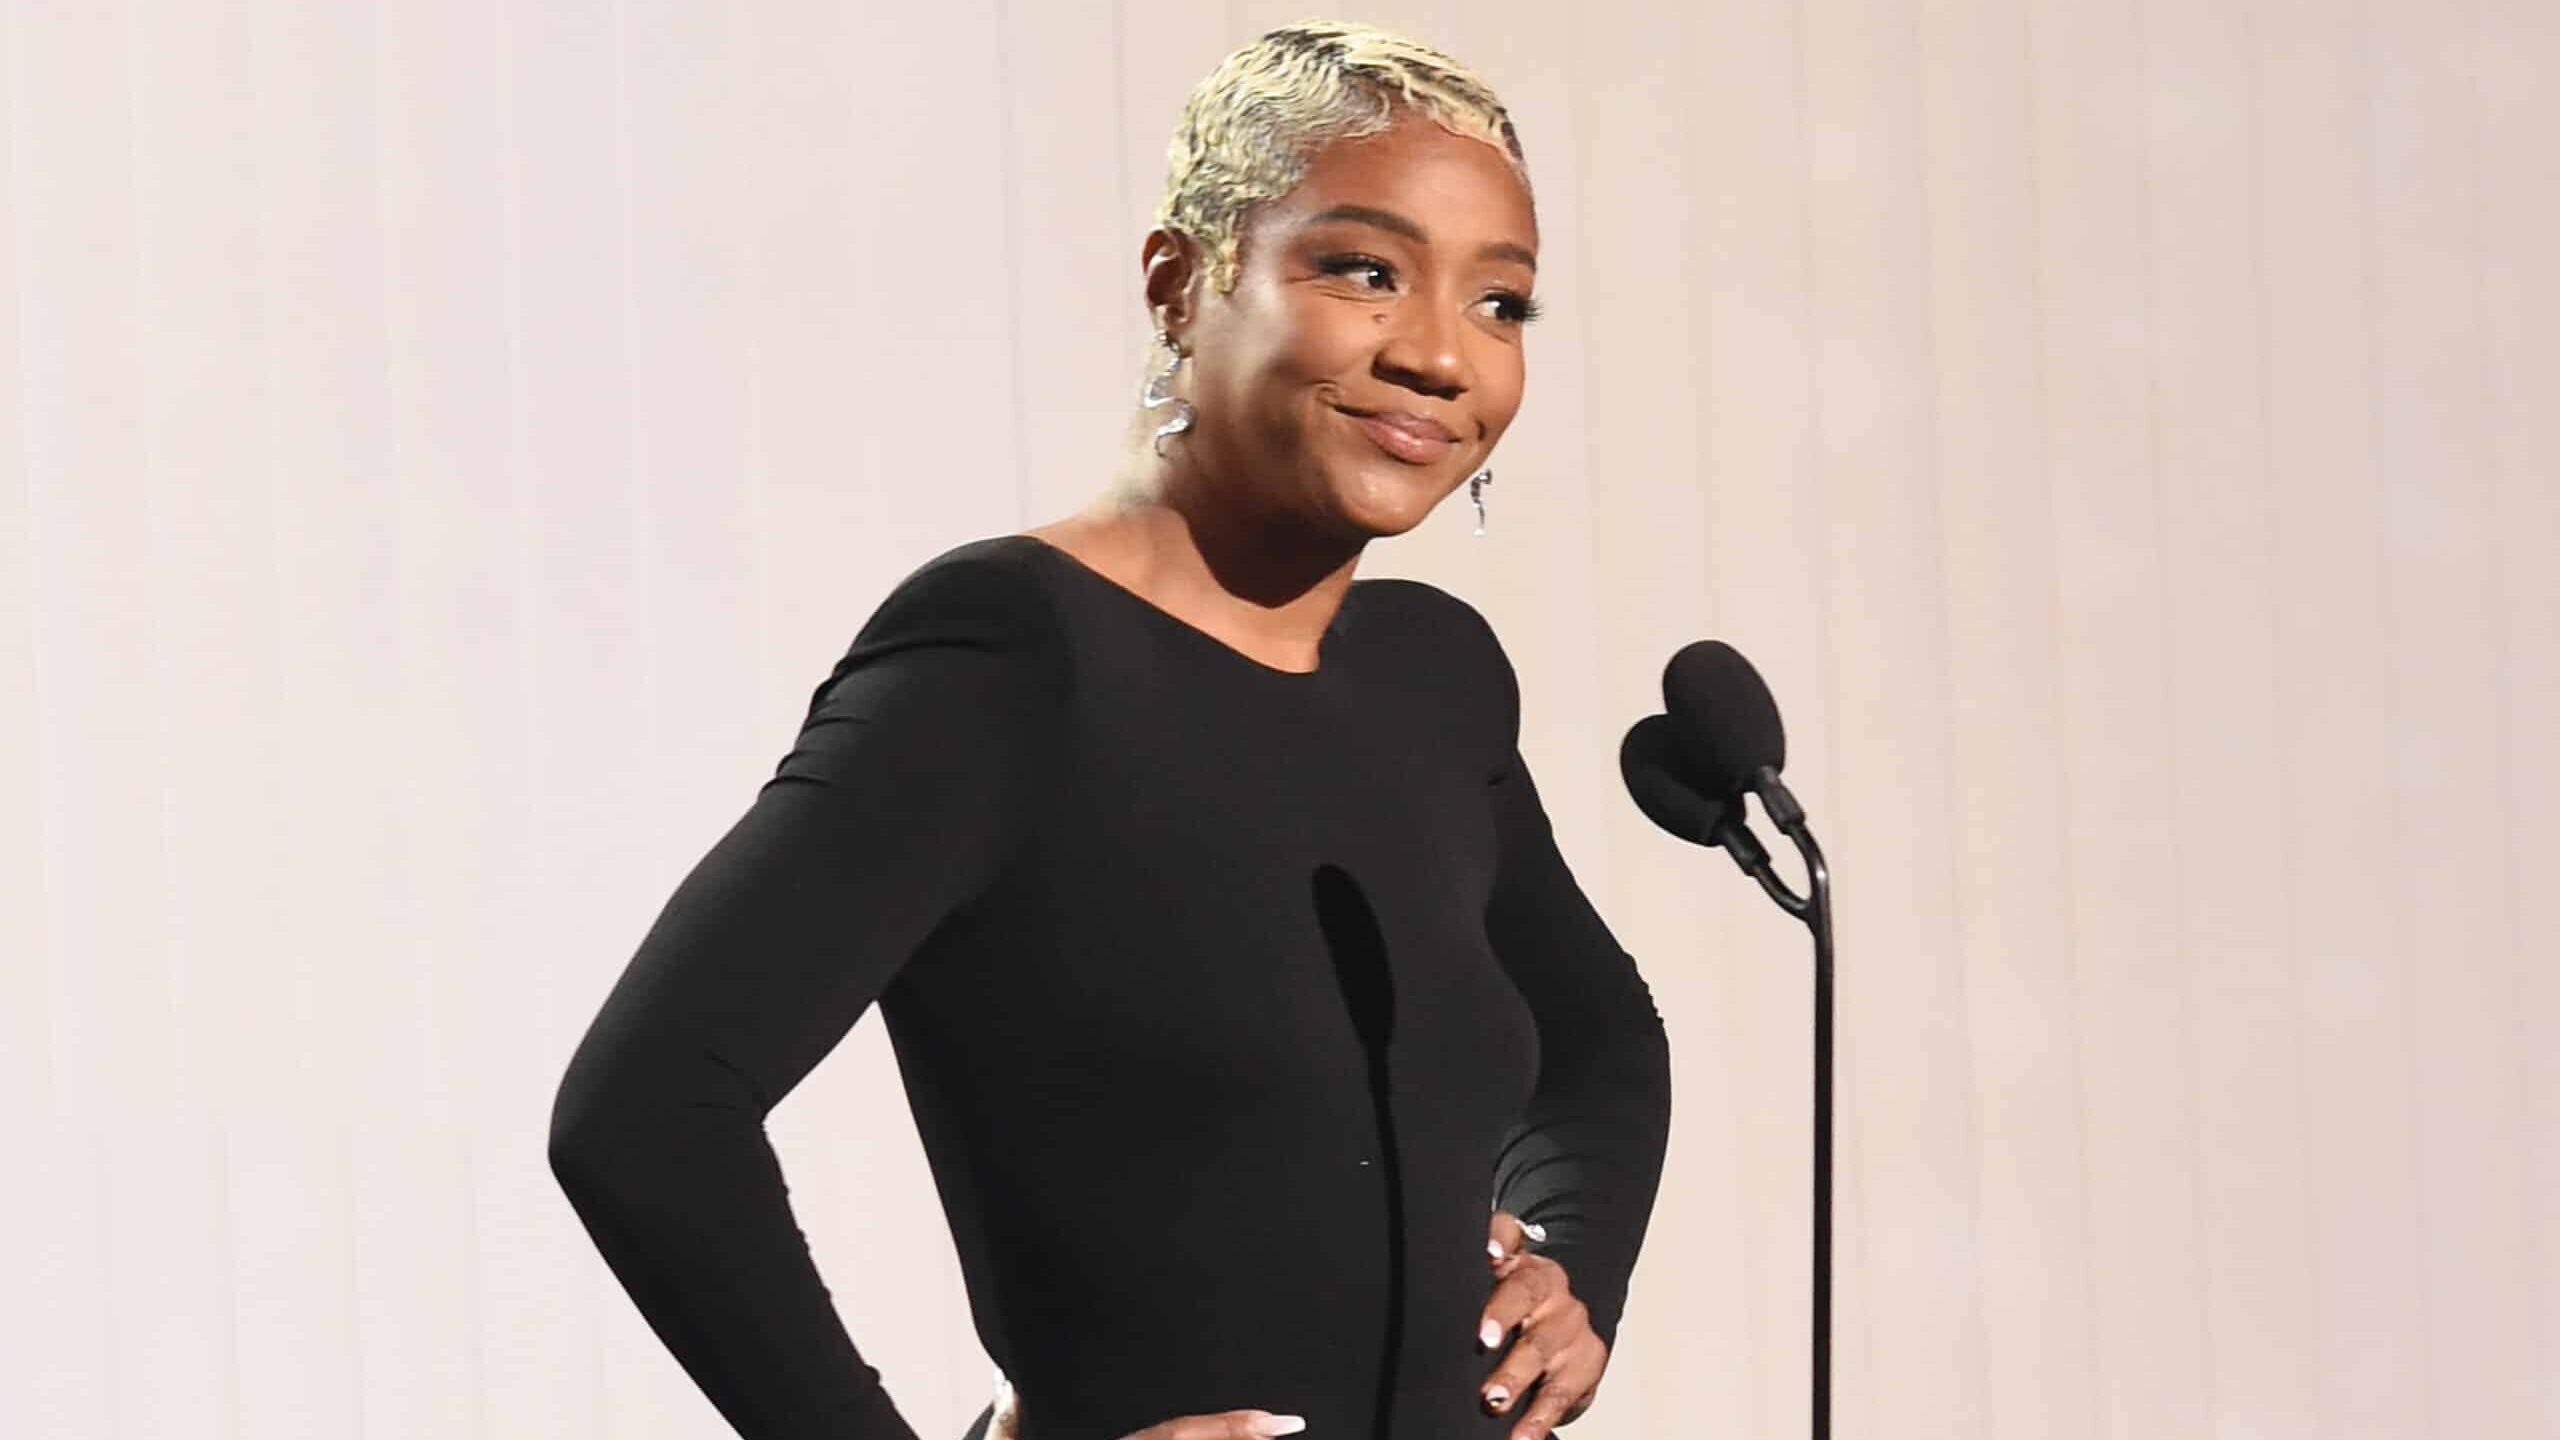 Tiffany Haddish speaks onstage at The 2023 ESPYS held at Dolby Theatre on July 12, 2023 in Los Angeles, California.